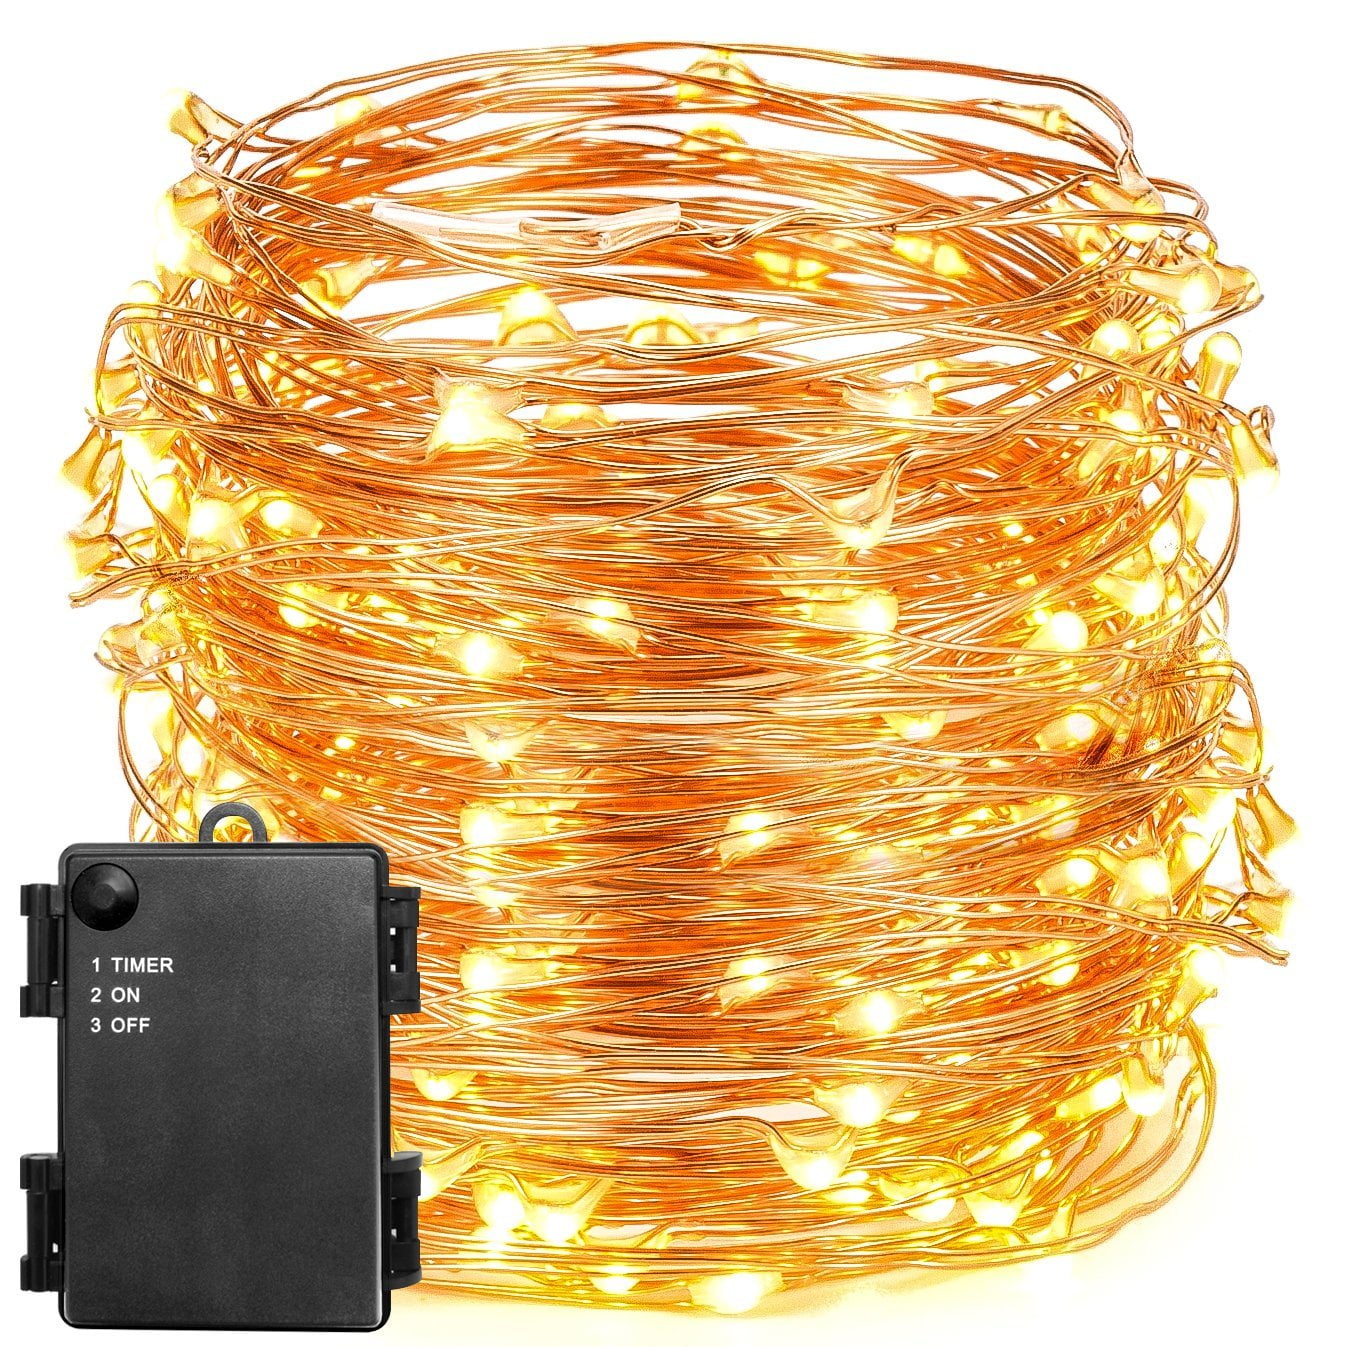 Oak Leaf 19 7ft 120 Led Waterproof, How To Fix Battery Operated String Lights